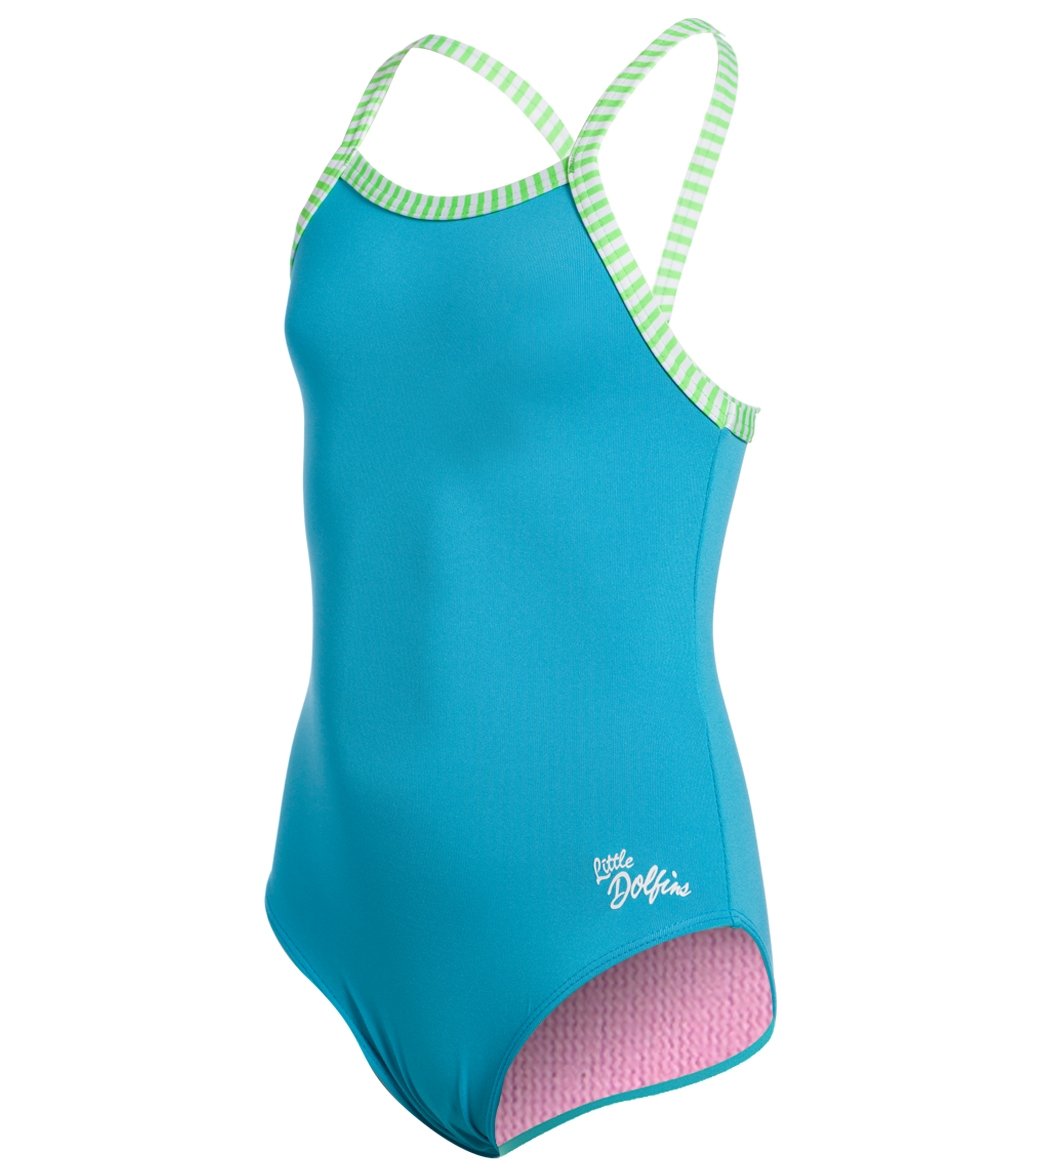 Dolfin Toddler Girls' Solid One Piece Swimsuit 2T-6X - Turquoise 2T - Swimoutlet.com